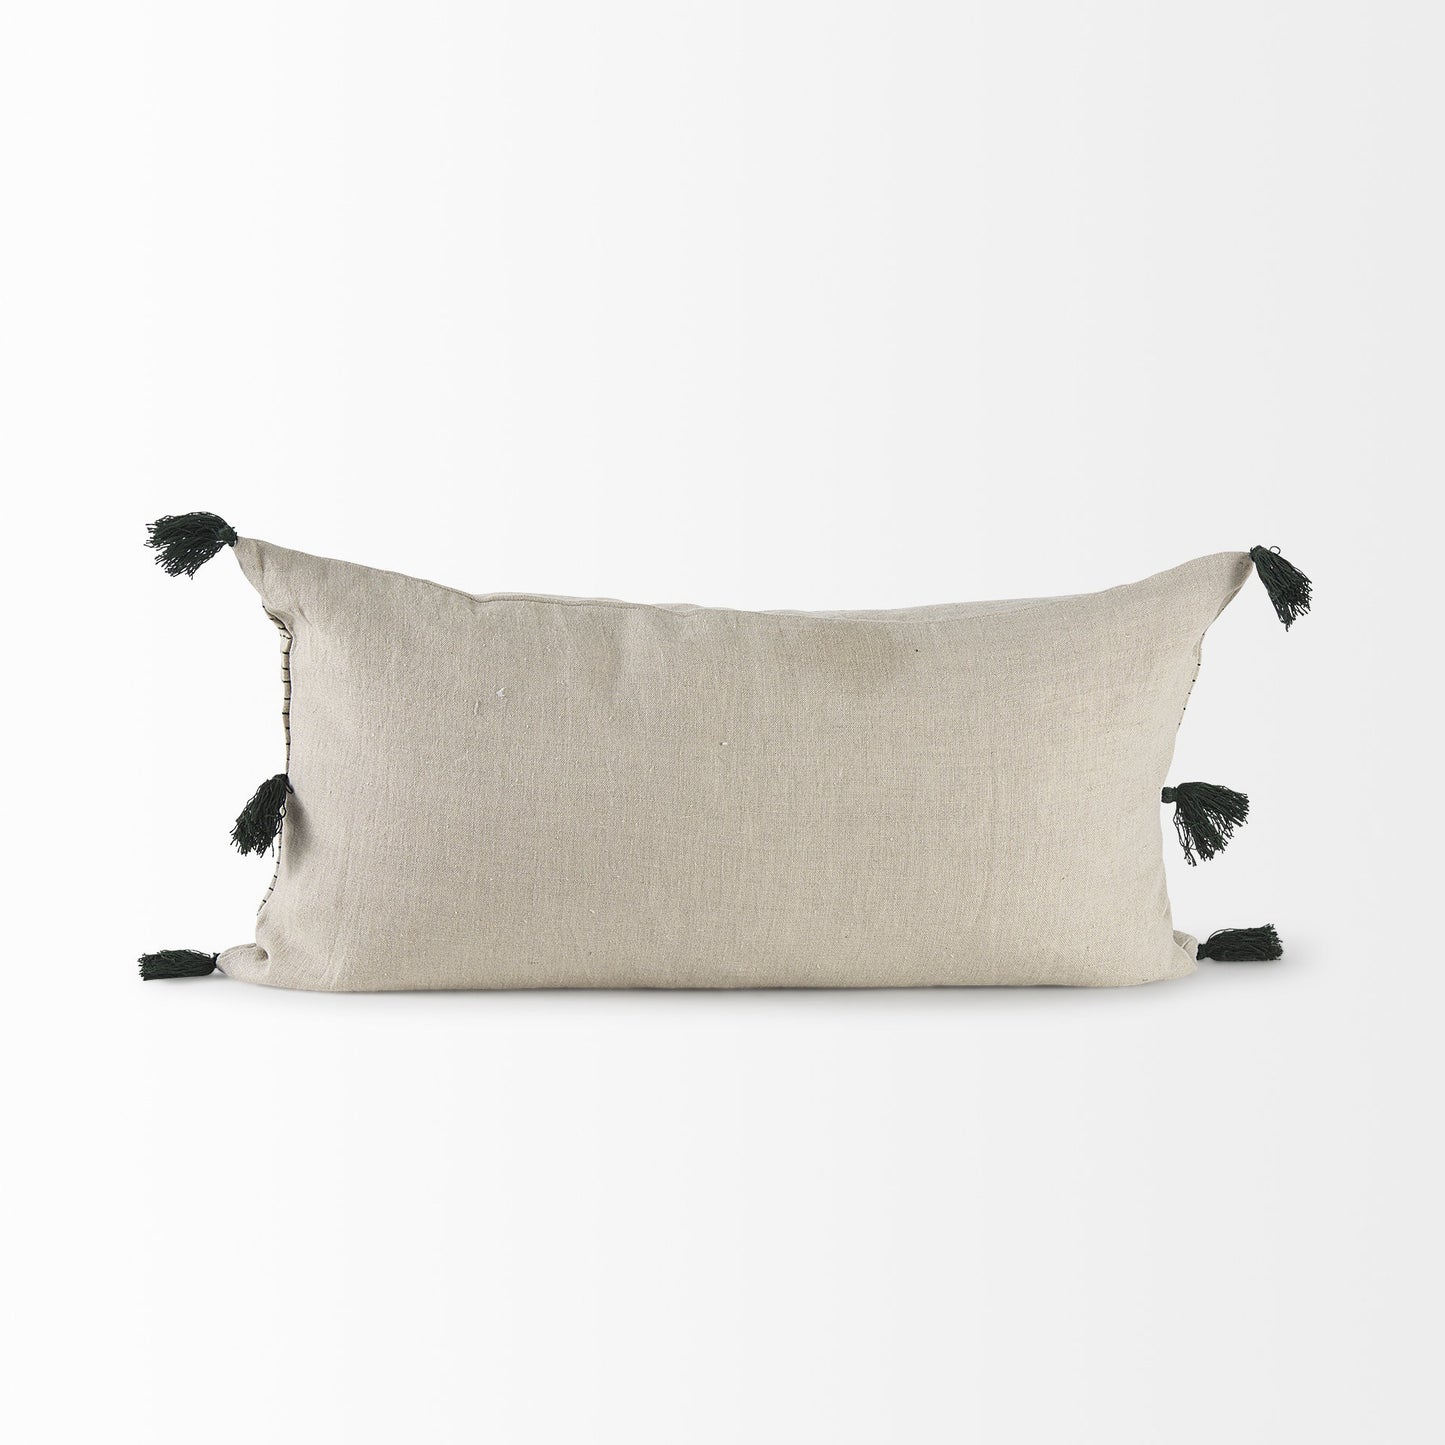 Beige And Dark Green Dotted Lumbar Pillow Cover